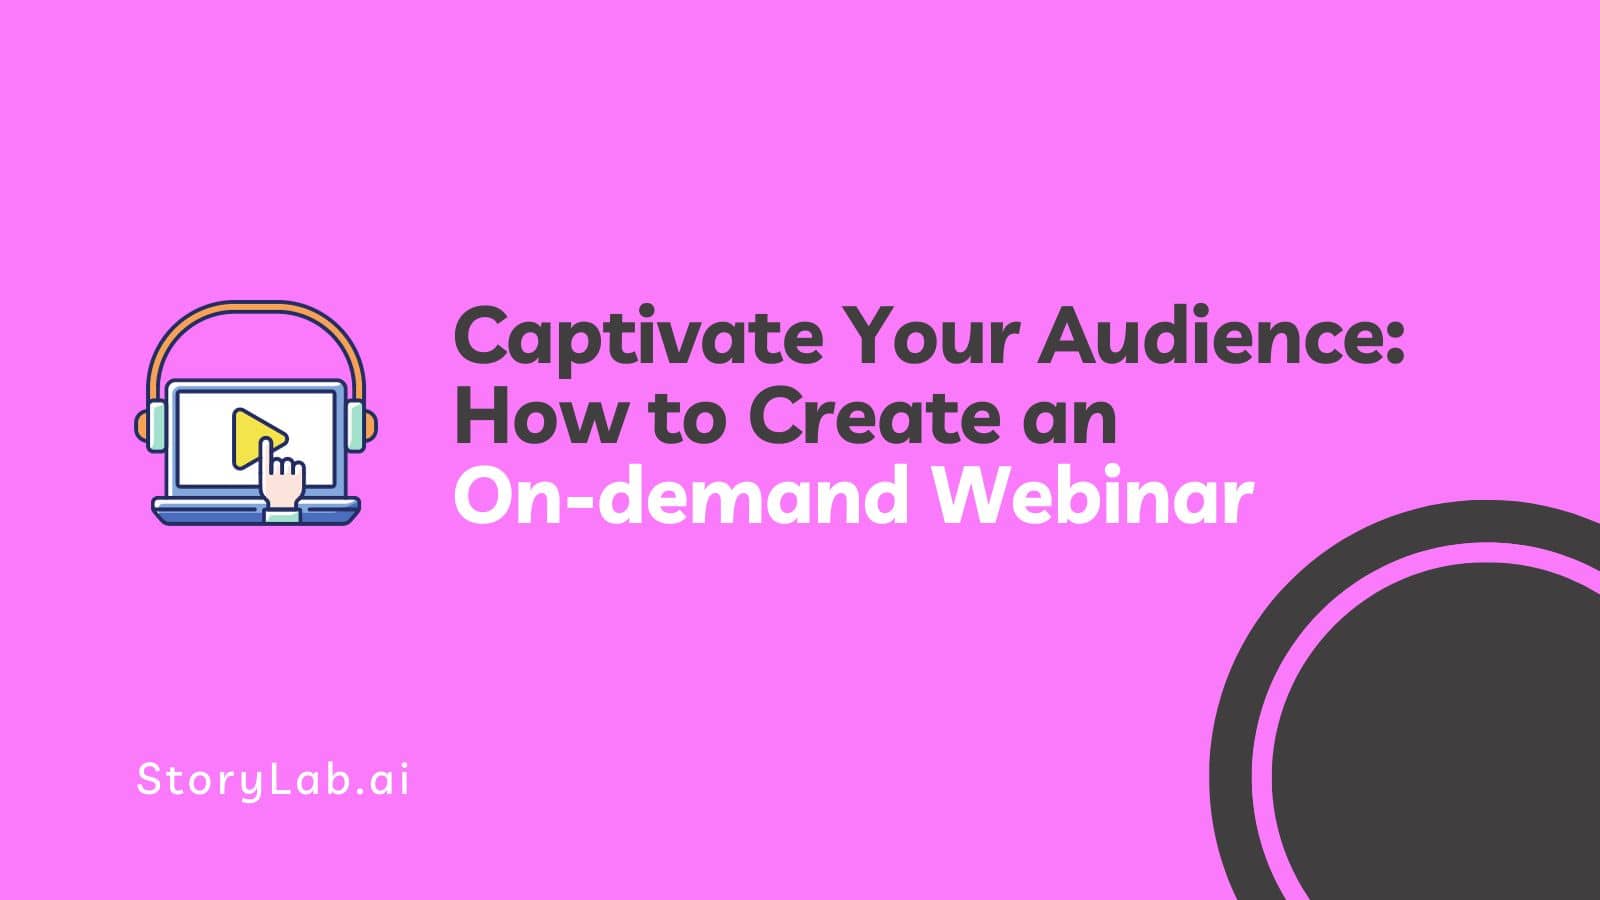 Captivate Your Audience How to Create an On-demand Webinar